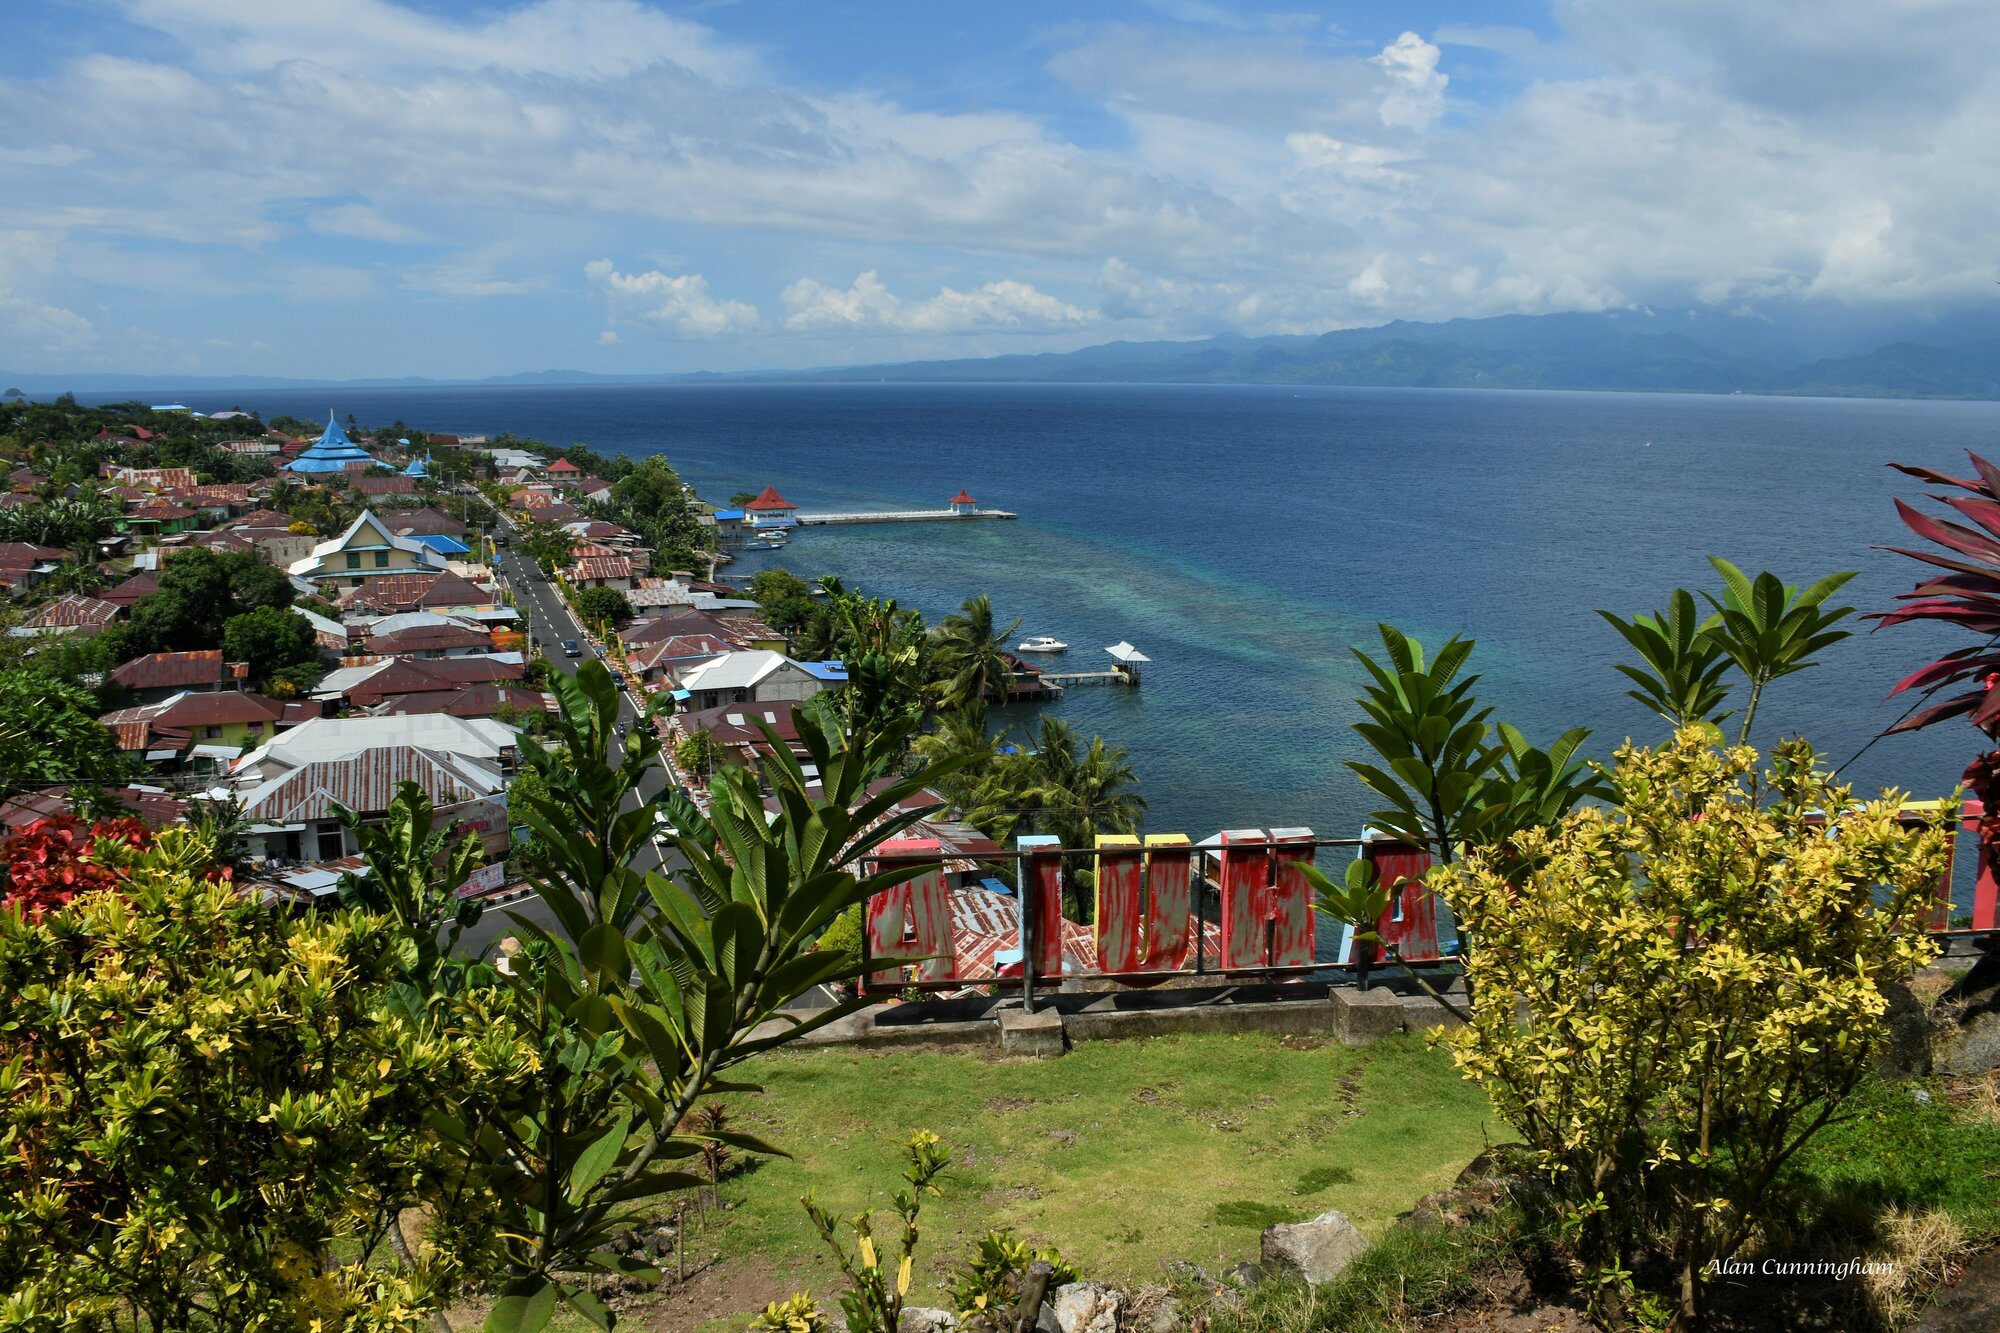 Moluccas - Spice Islands: View island capital Tidore